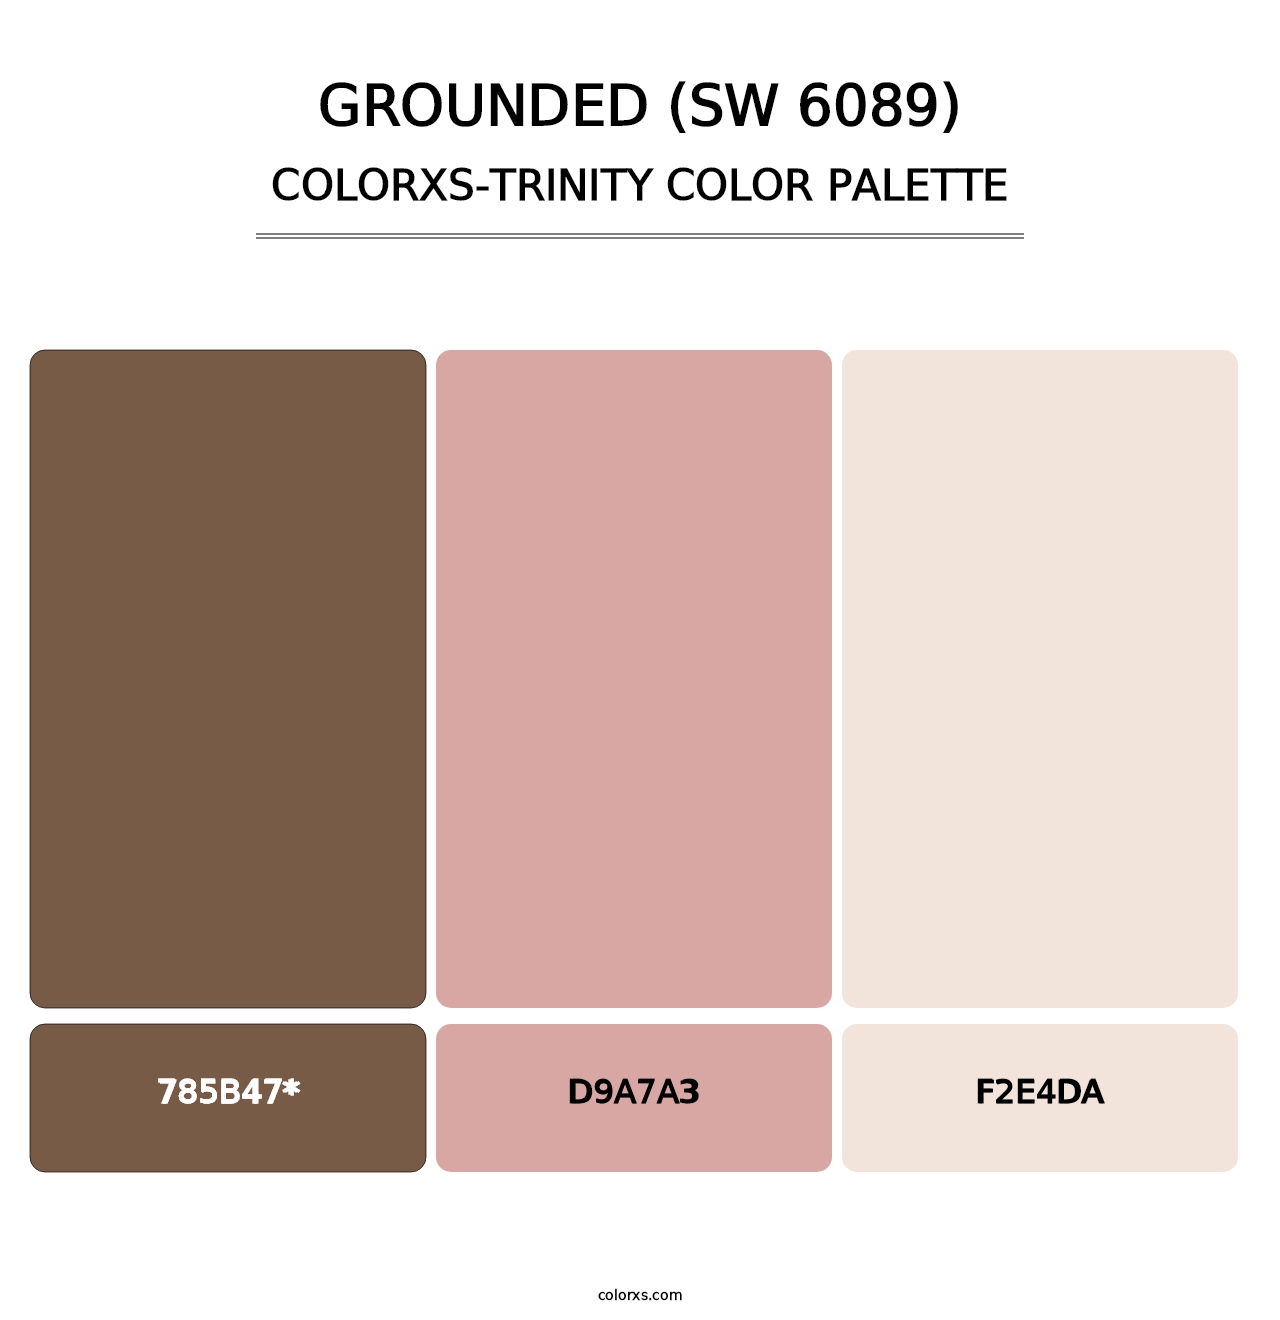 Grounded (SW 6089) - Colorxs Trinity Palette